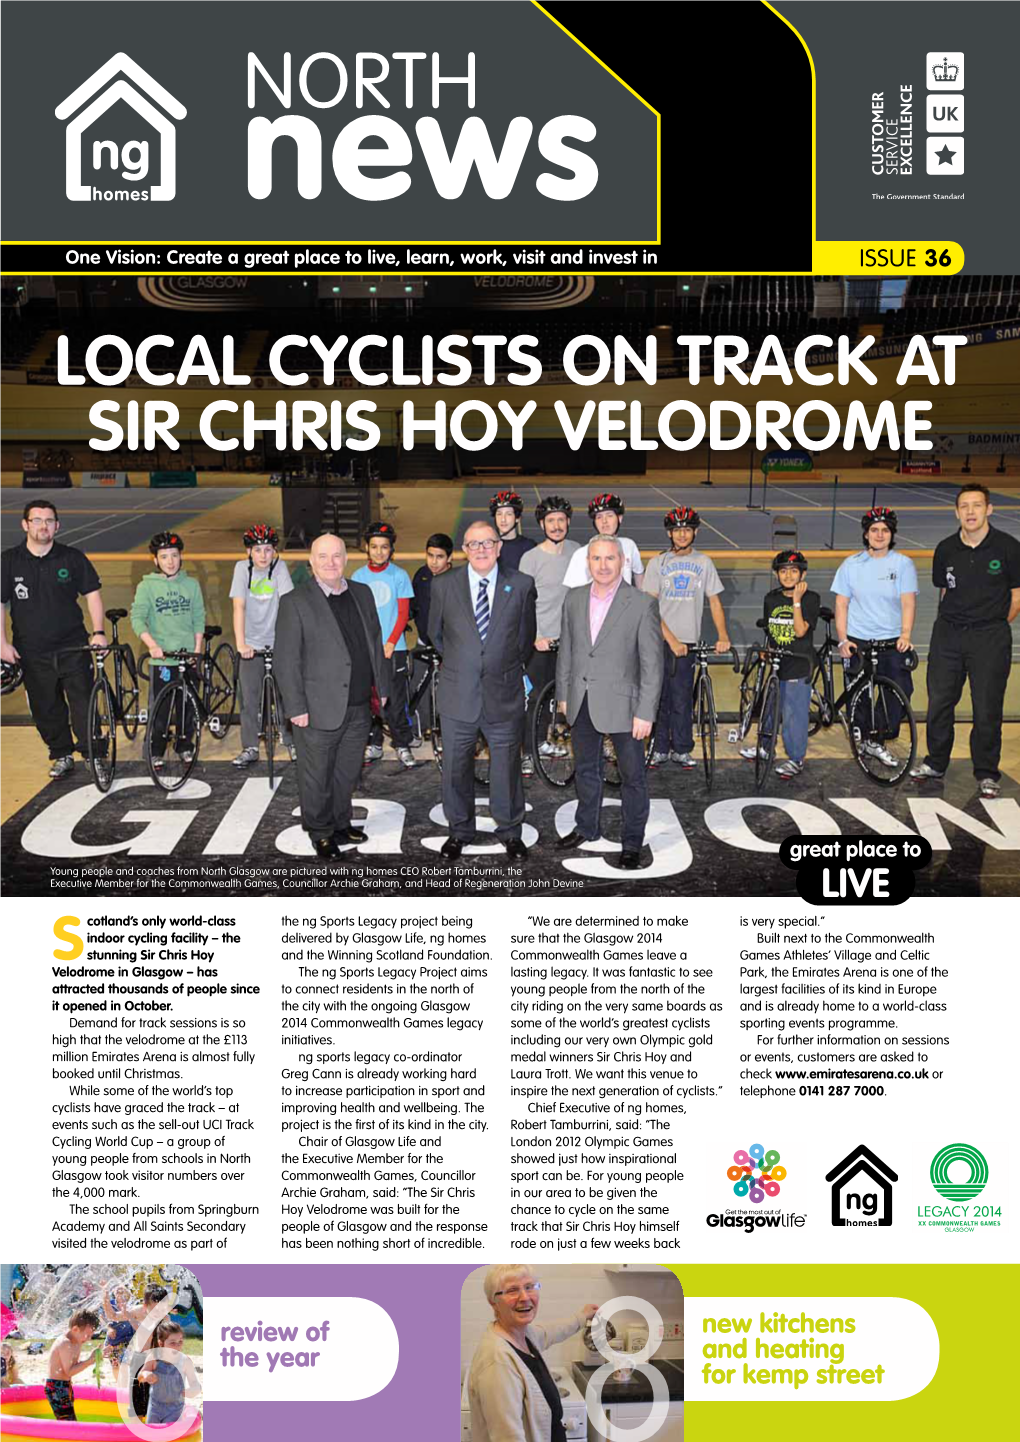 Local Cyclists on Track at Sir Chris Hoy Velodrome